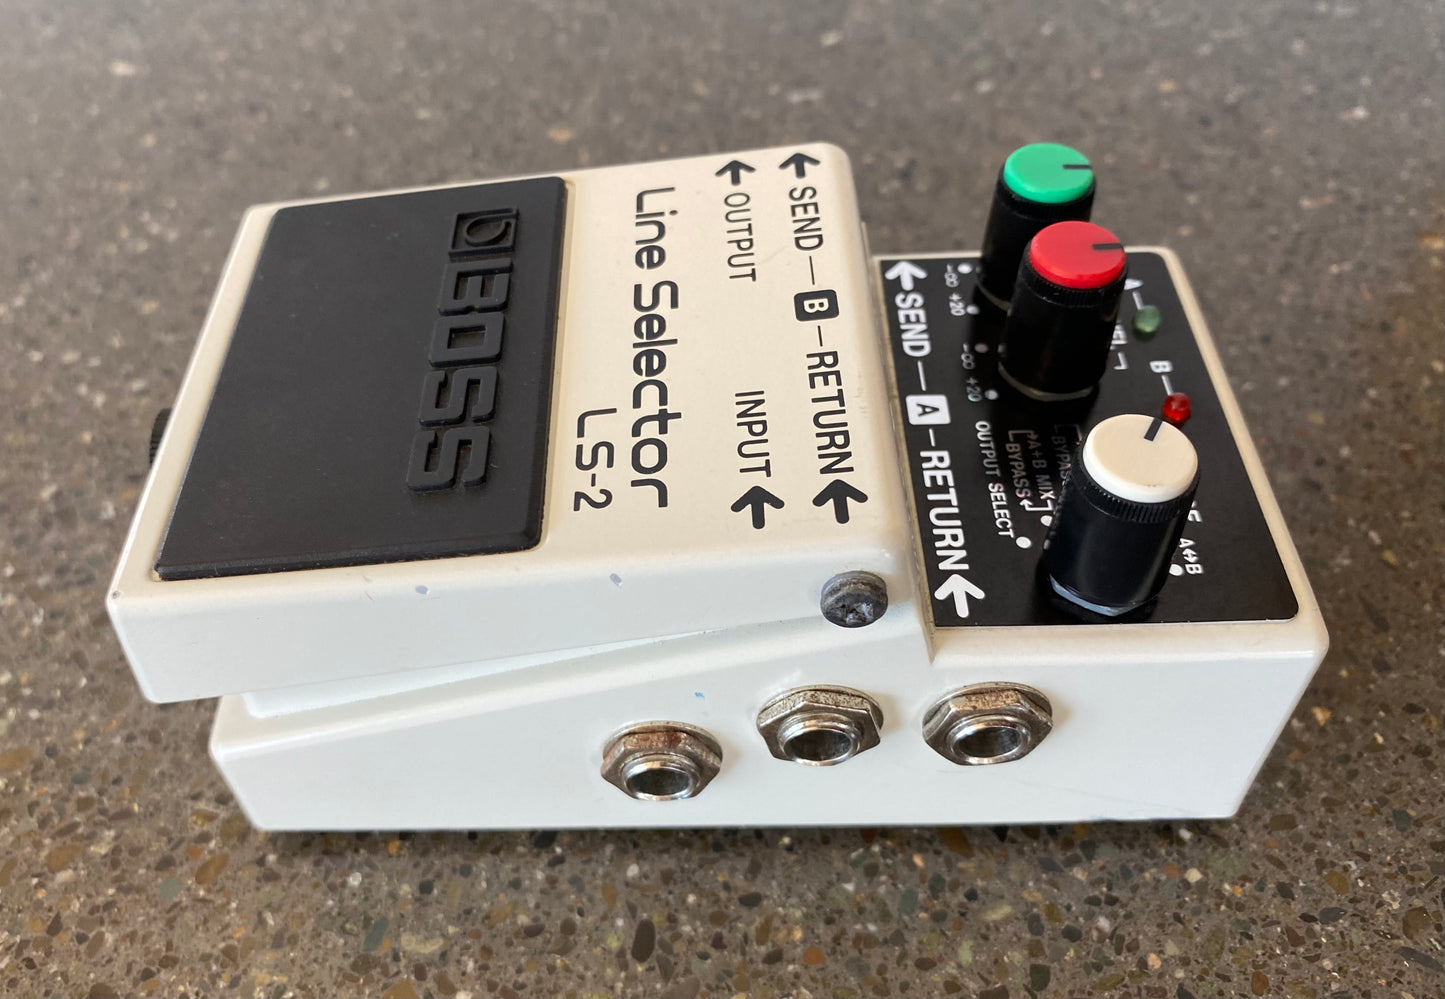 Pre-Owned Boss Line Selector -LS-2 Pedal